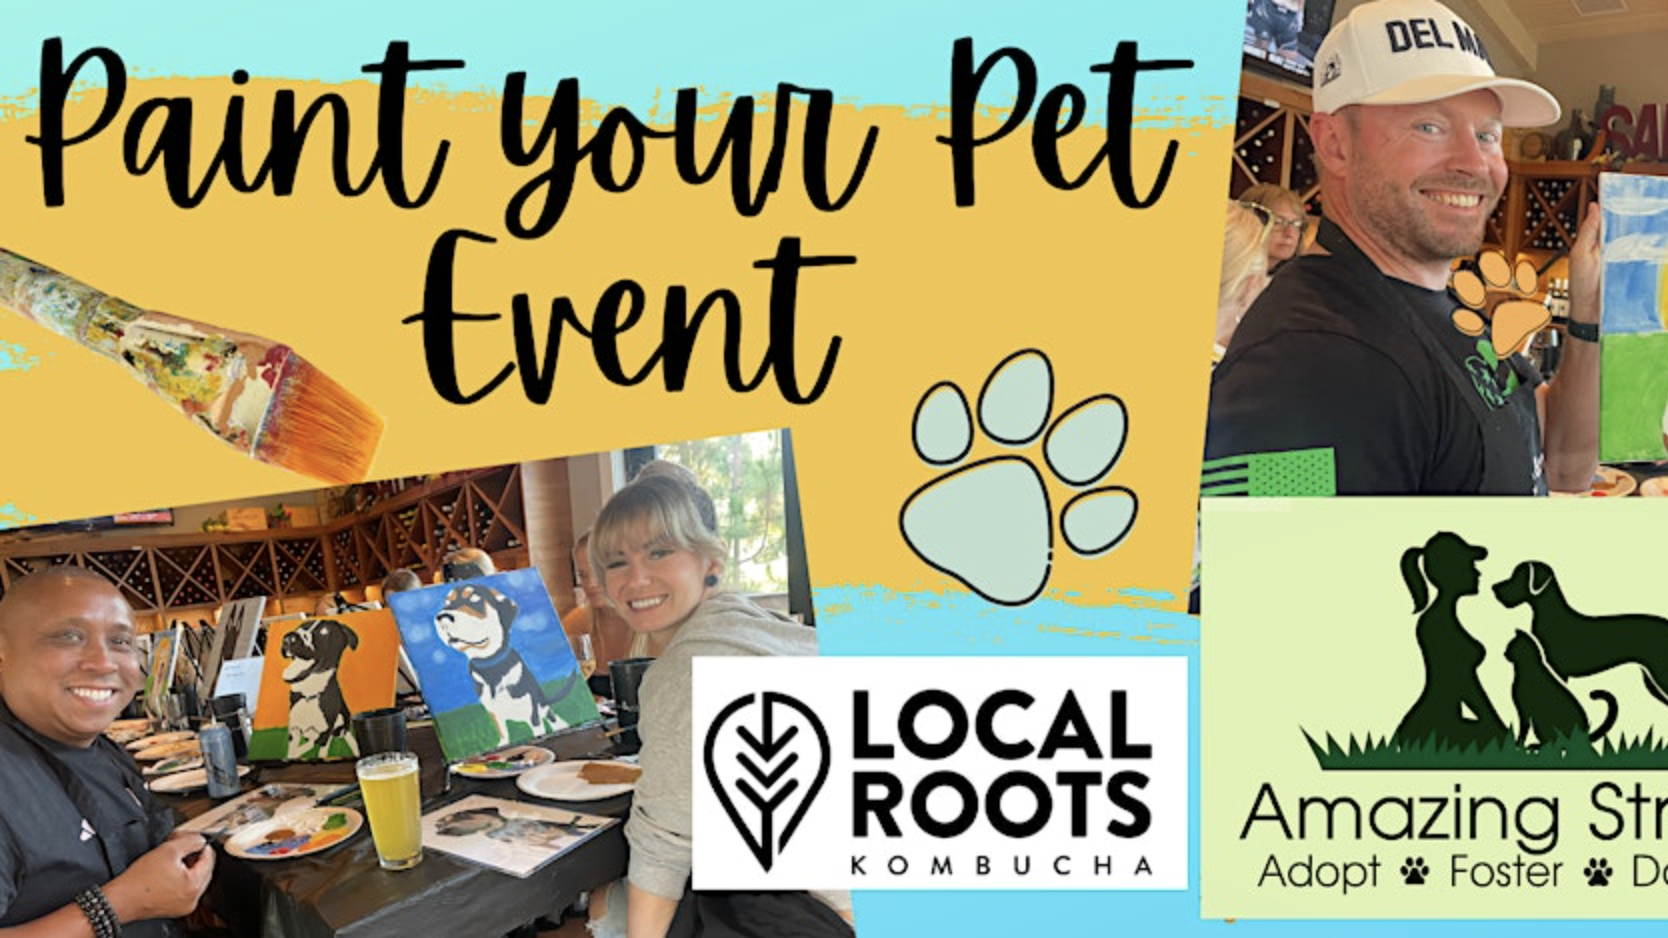 Banner for "Paint Your Pet" Event

Join us in creating customized pet portraits. Enjoy a fun and creative atmosphere. Partners: Local Roots Kombucha and Amazing Strays. Photos below show participants happily painting their pets.